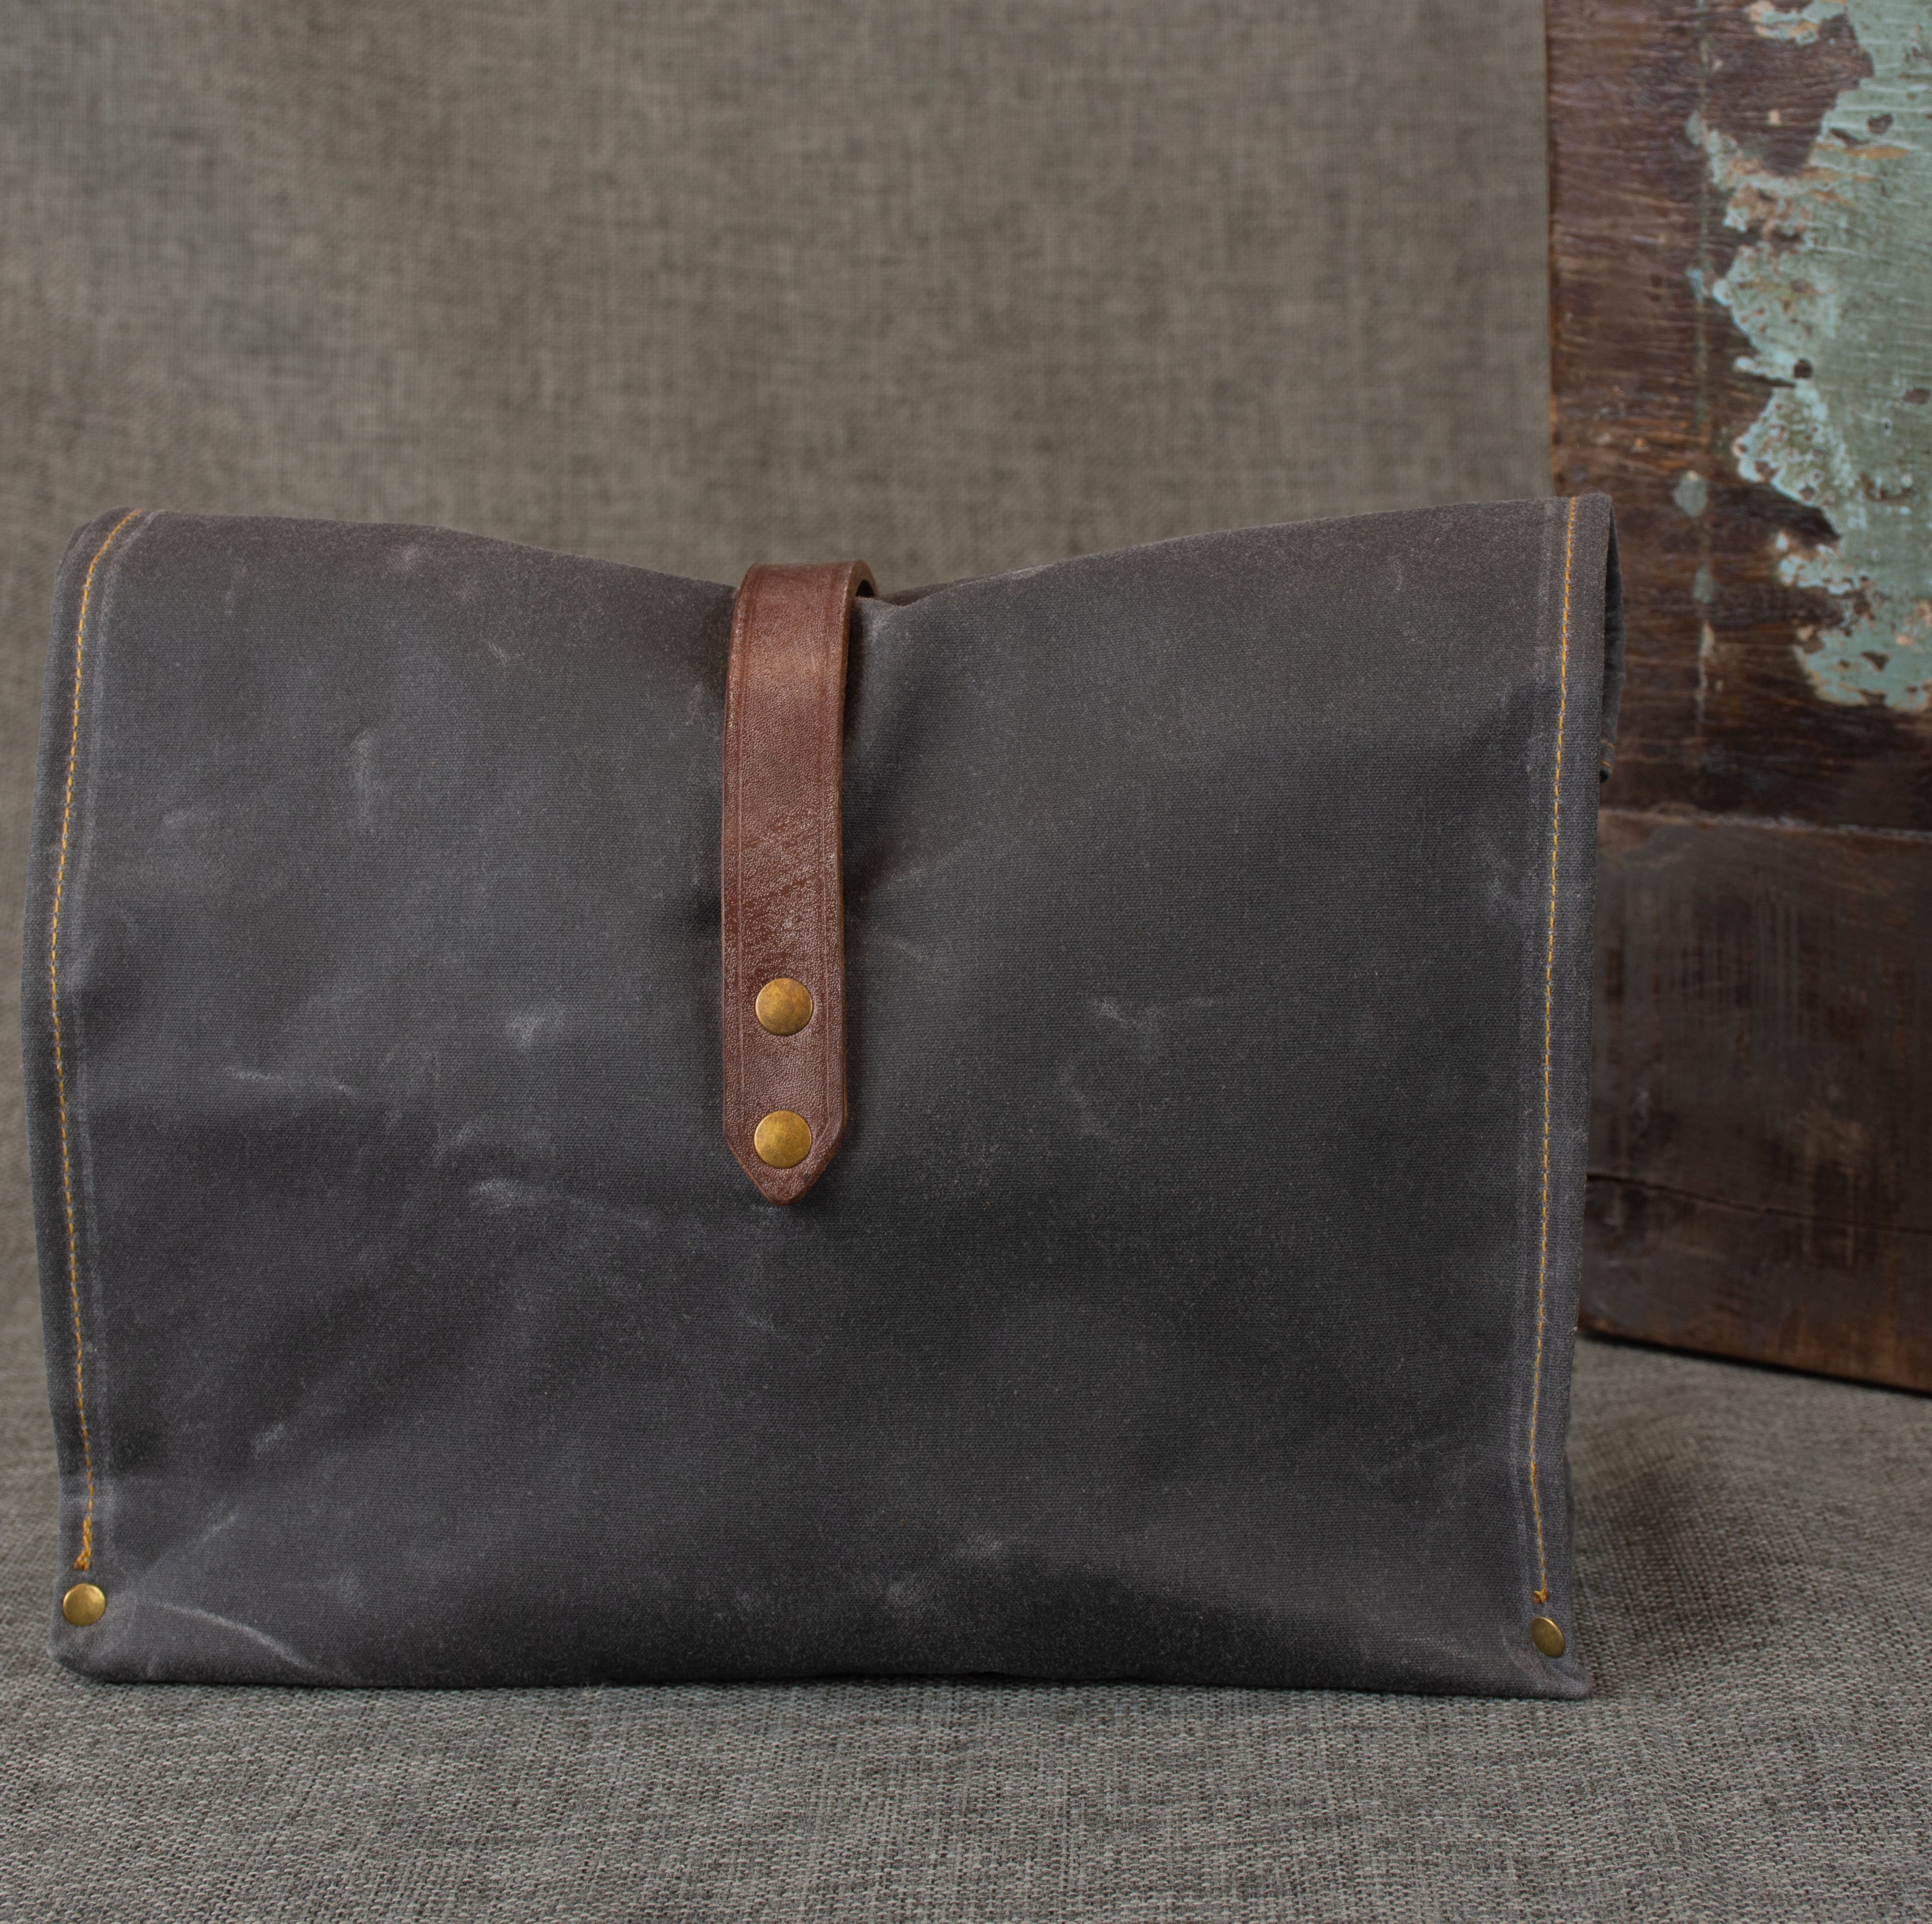 Image shows back view of a grey waxed cotton roll top bag with a brown oak bark tanned leather strap on a grey linen background.